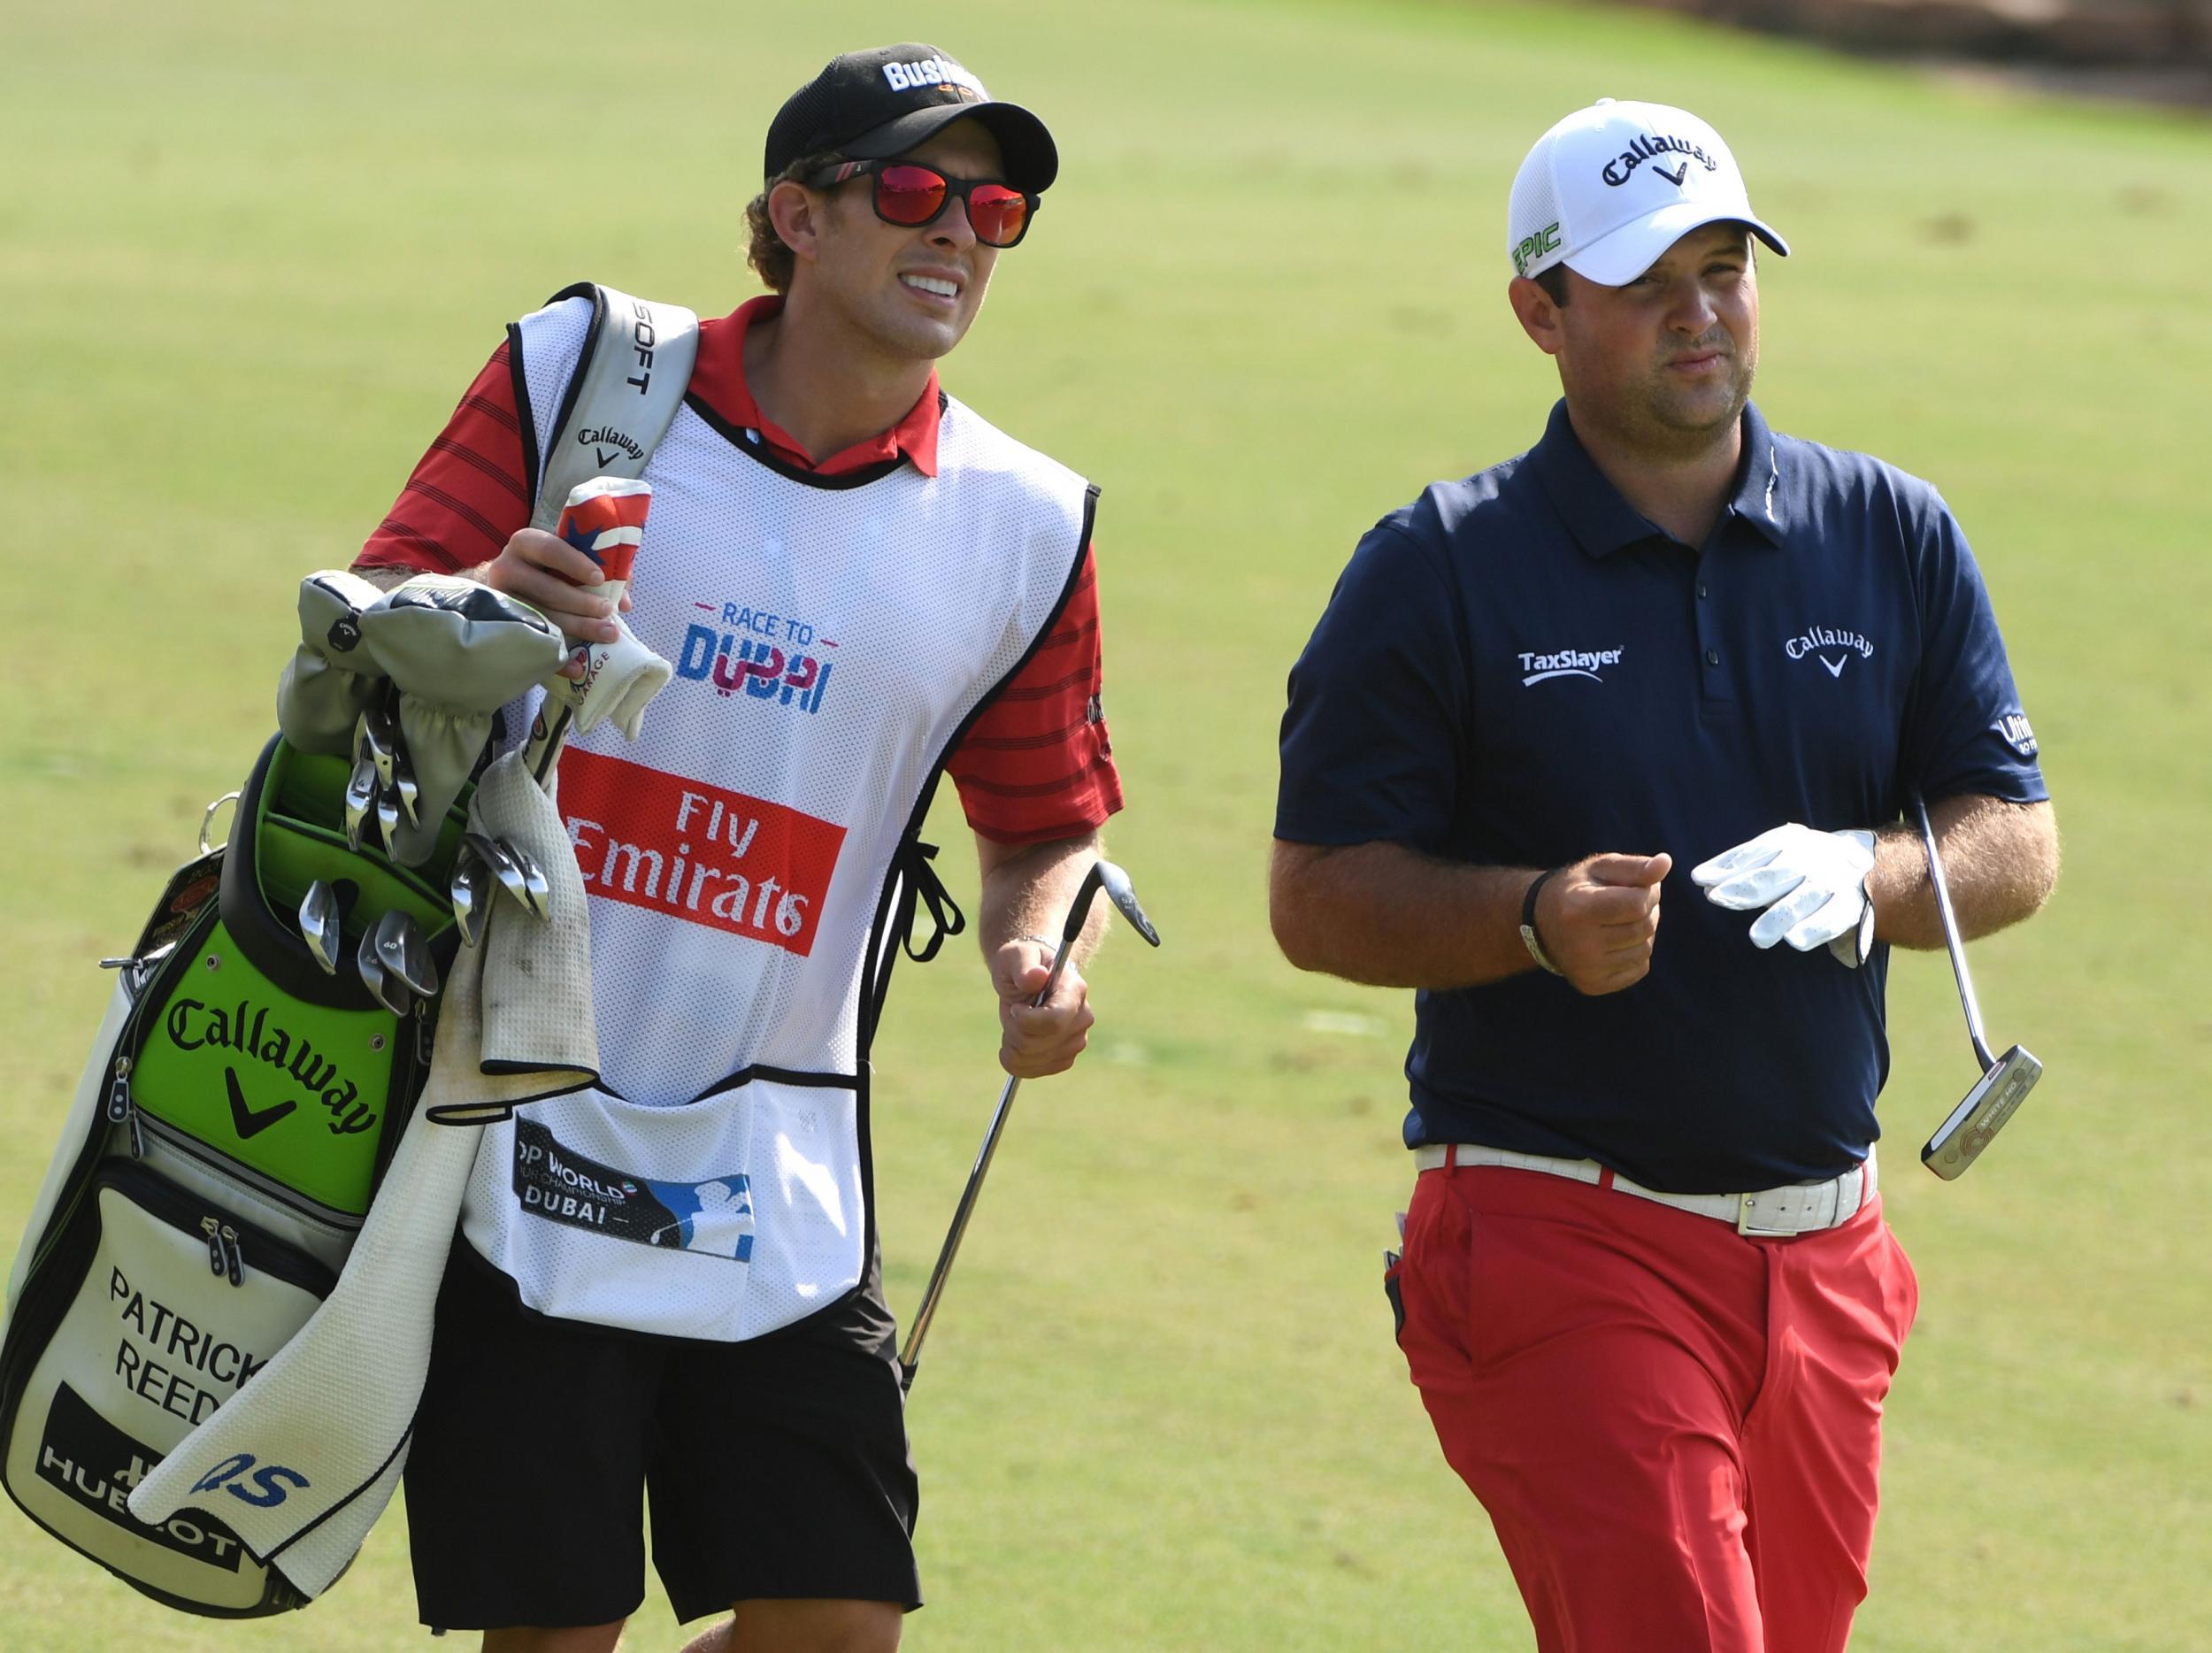 Patrick Reed set the early pace in Dubai